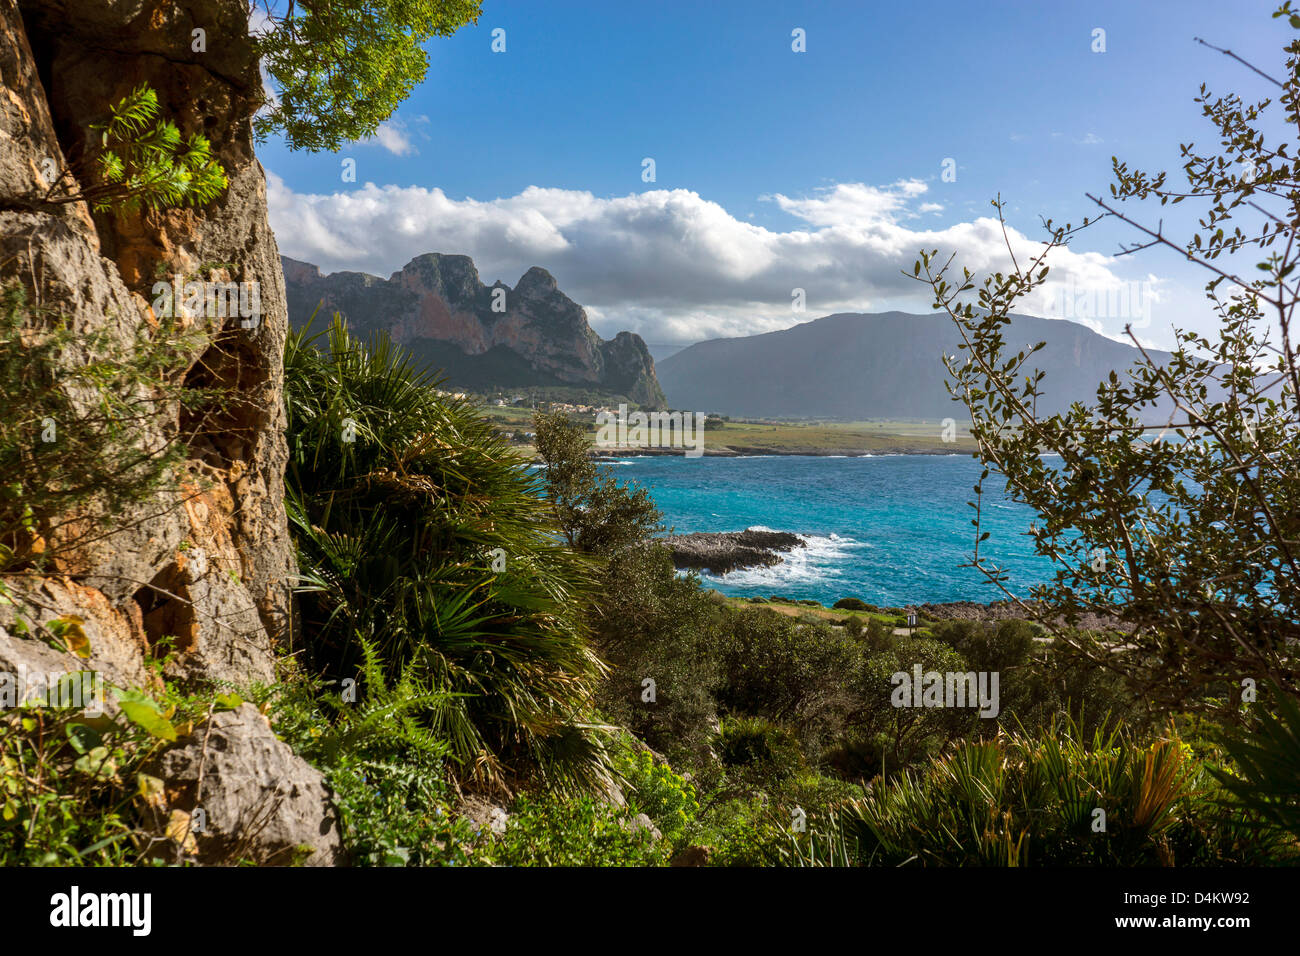 Spring greenery, rocky landscape blue sea and distant mountains, cumulus clouds, San Vito lo Capo, Sicily Stock Photo